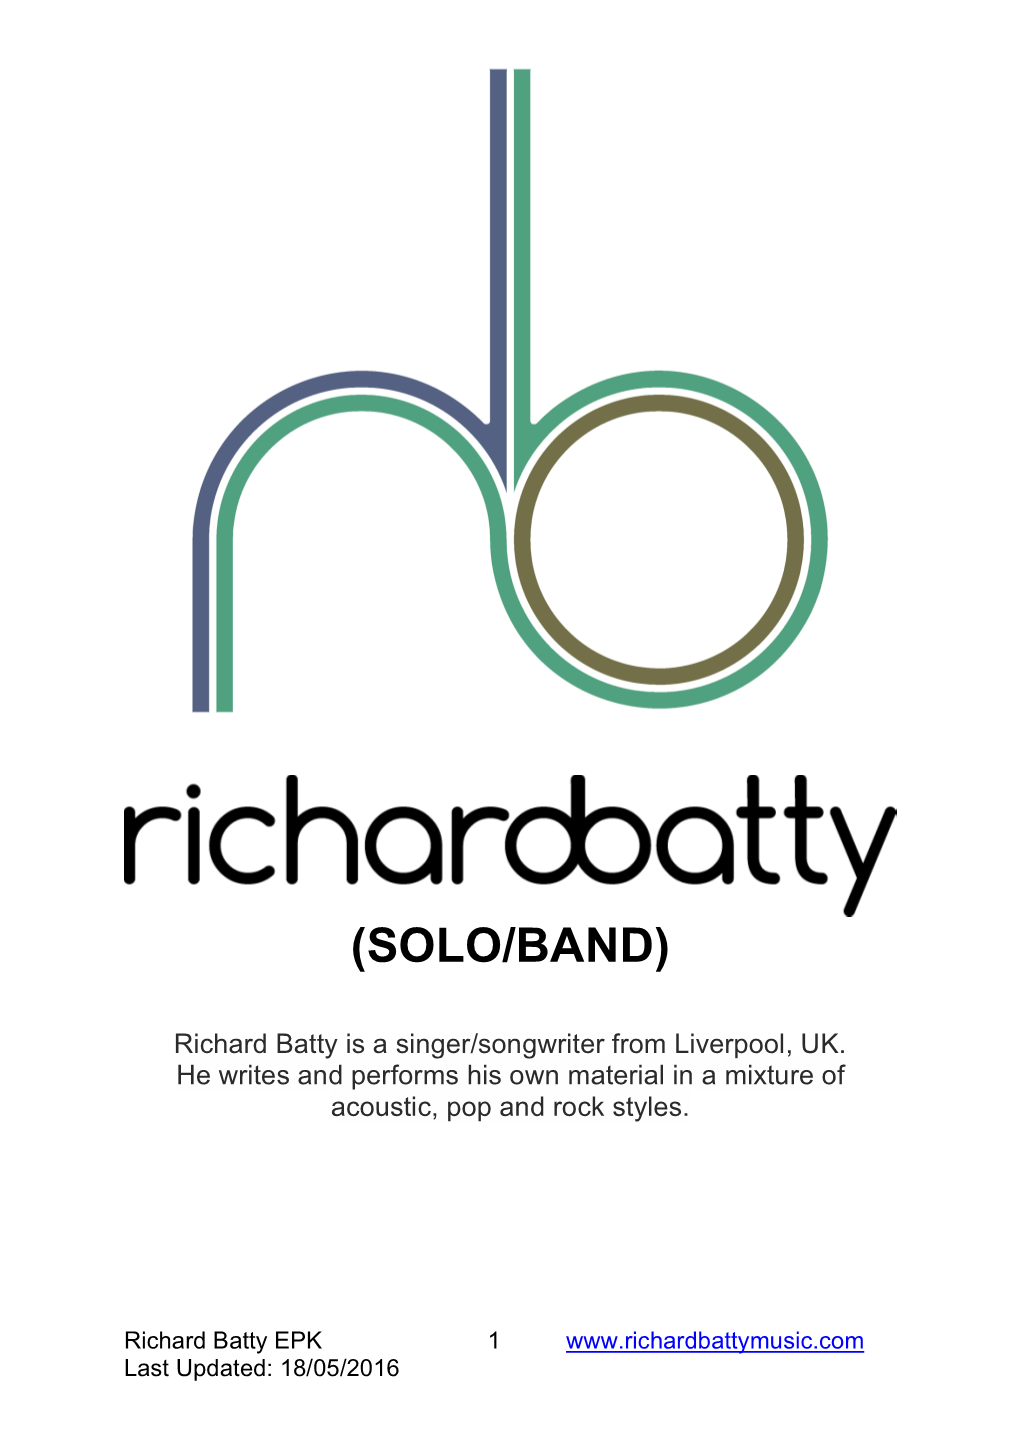 Richard Batty Is a Singer/Songwriter from Liverpool, UK. He Writes and Performs His Own Material in a Mixture of Acoustic, Pop and Rock Styles